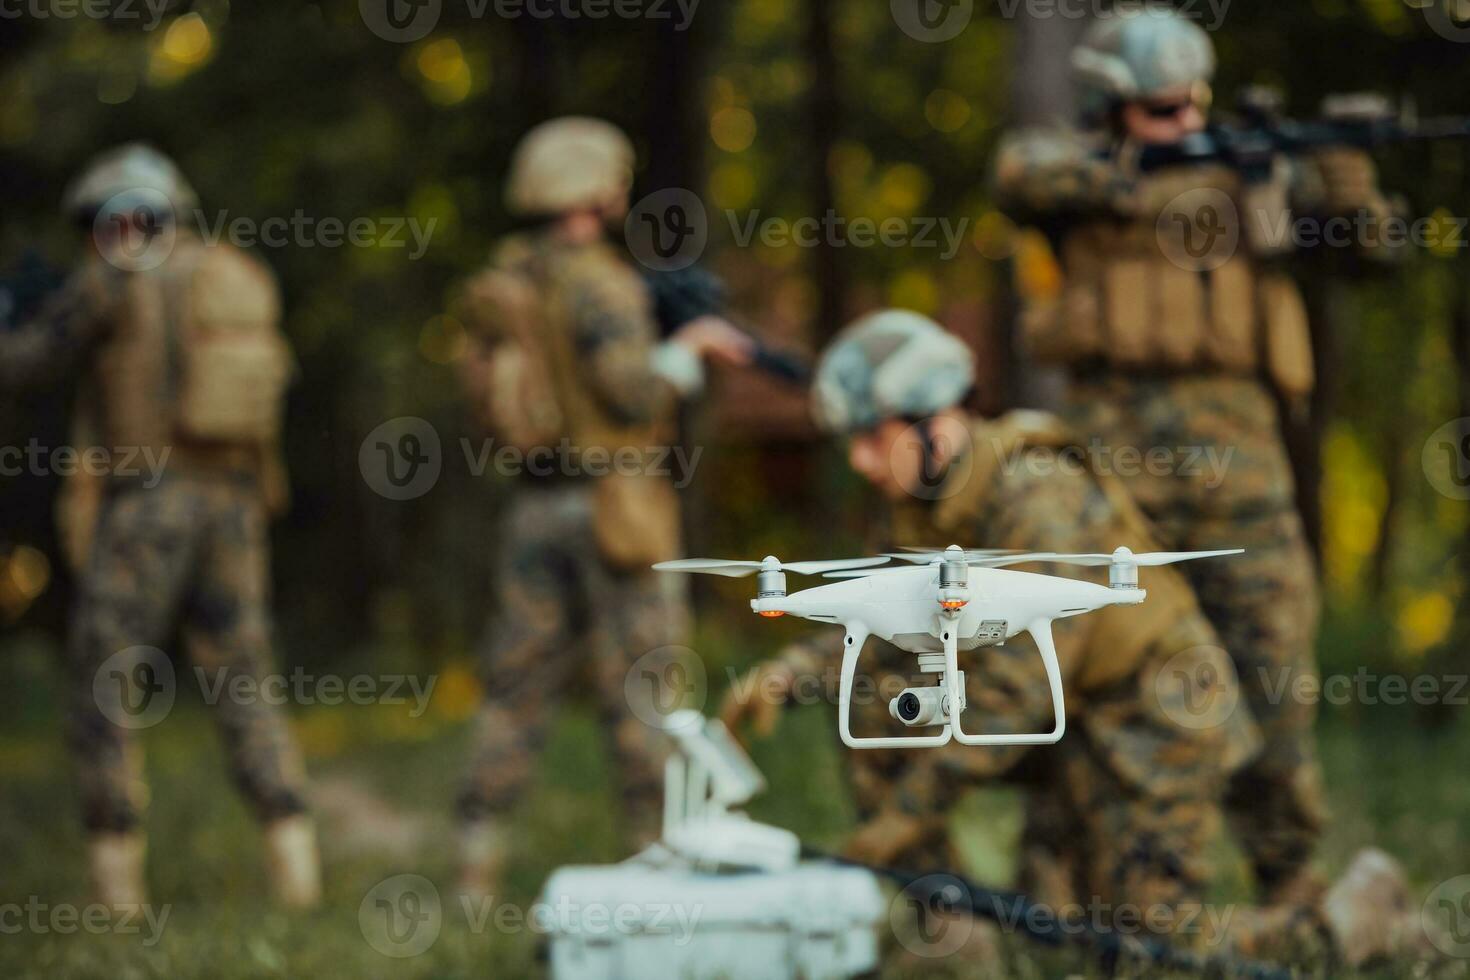 Modern Warfare Soldiers Squad are Using Drone for Scouting and Surveillance During Military Operation in the Forest. photo